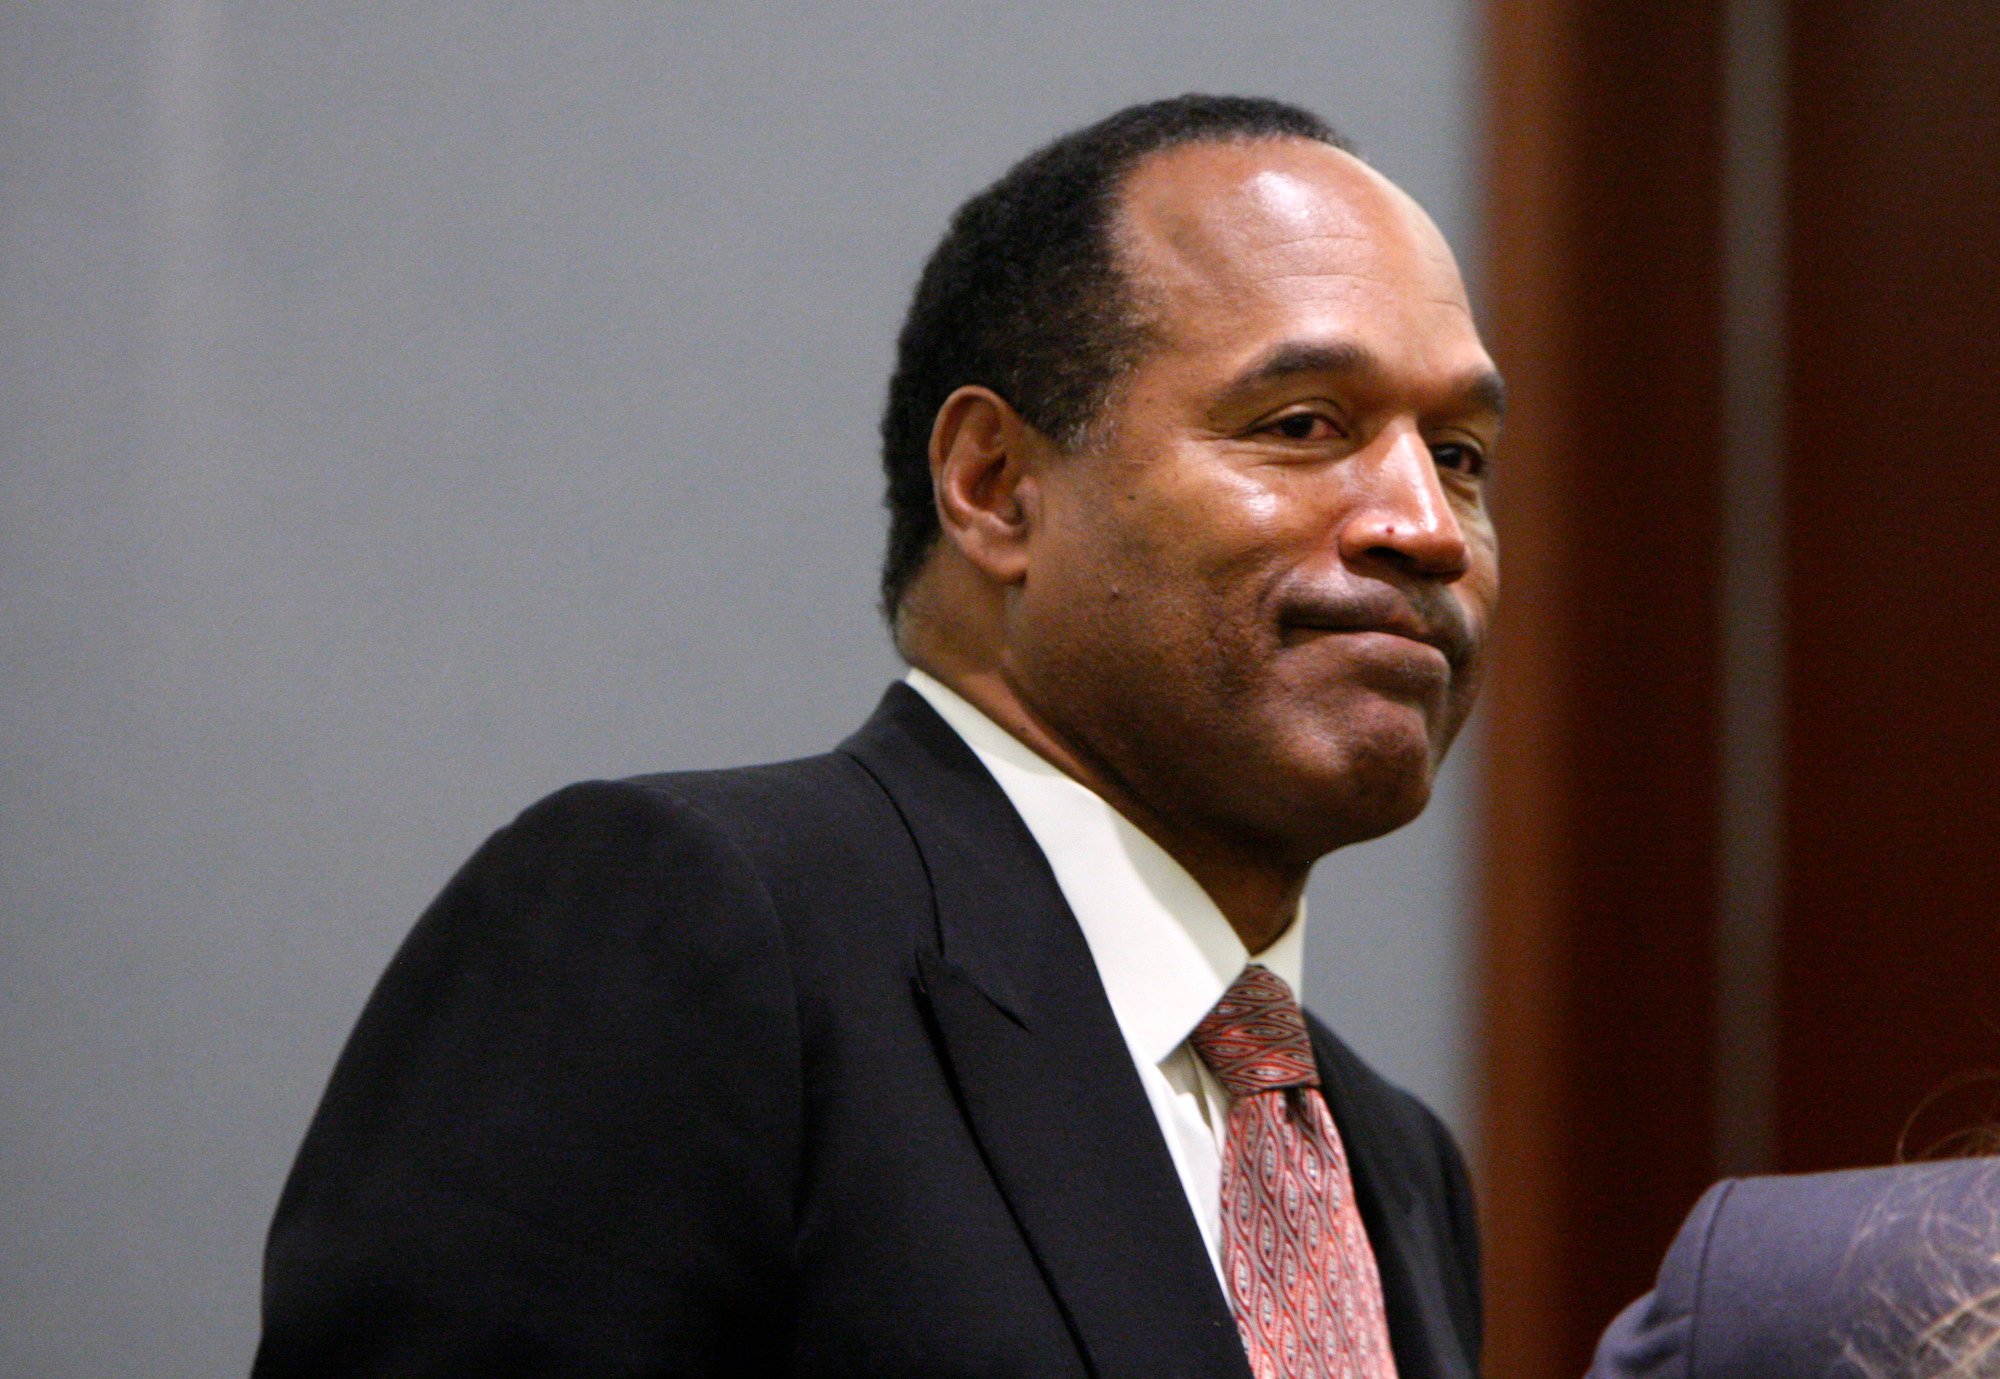 O.J. Simpson’s Daughter, Sydney, Changed Her Name and Switched Jobs Constantly Before Settling Down in Florida